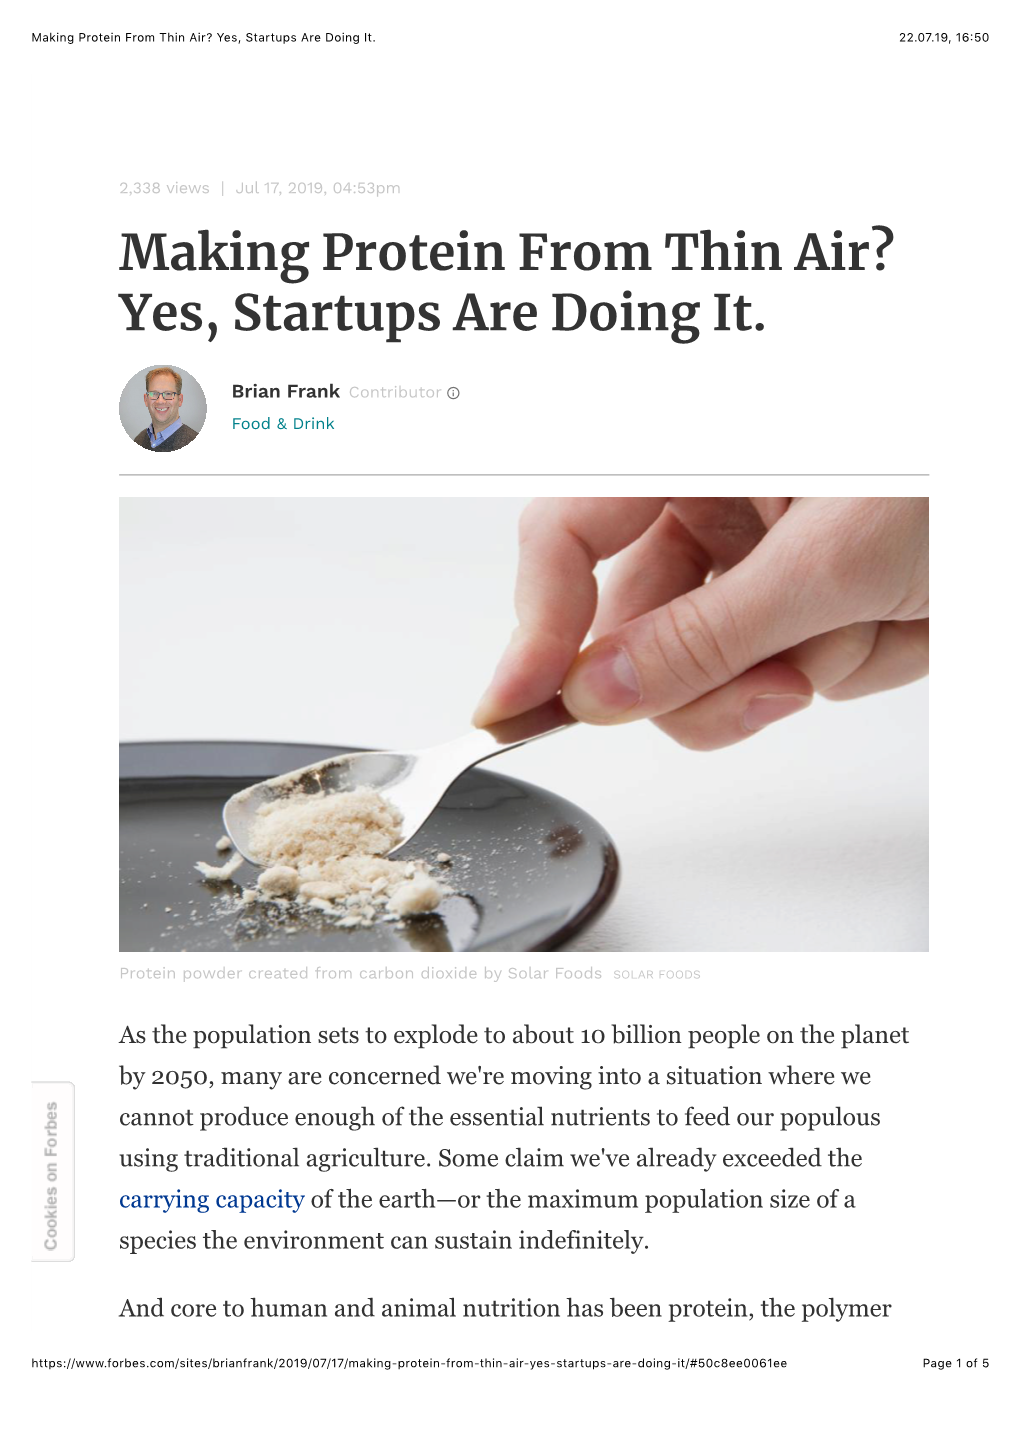 Making Protein from Thin Air? Yes, Startups Are Doing It